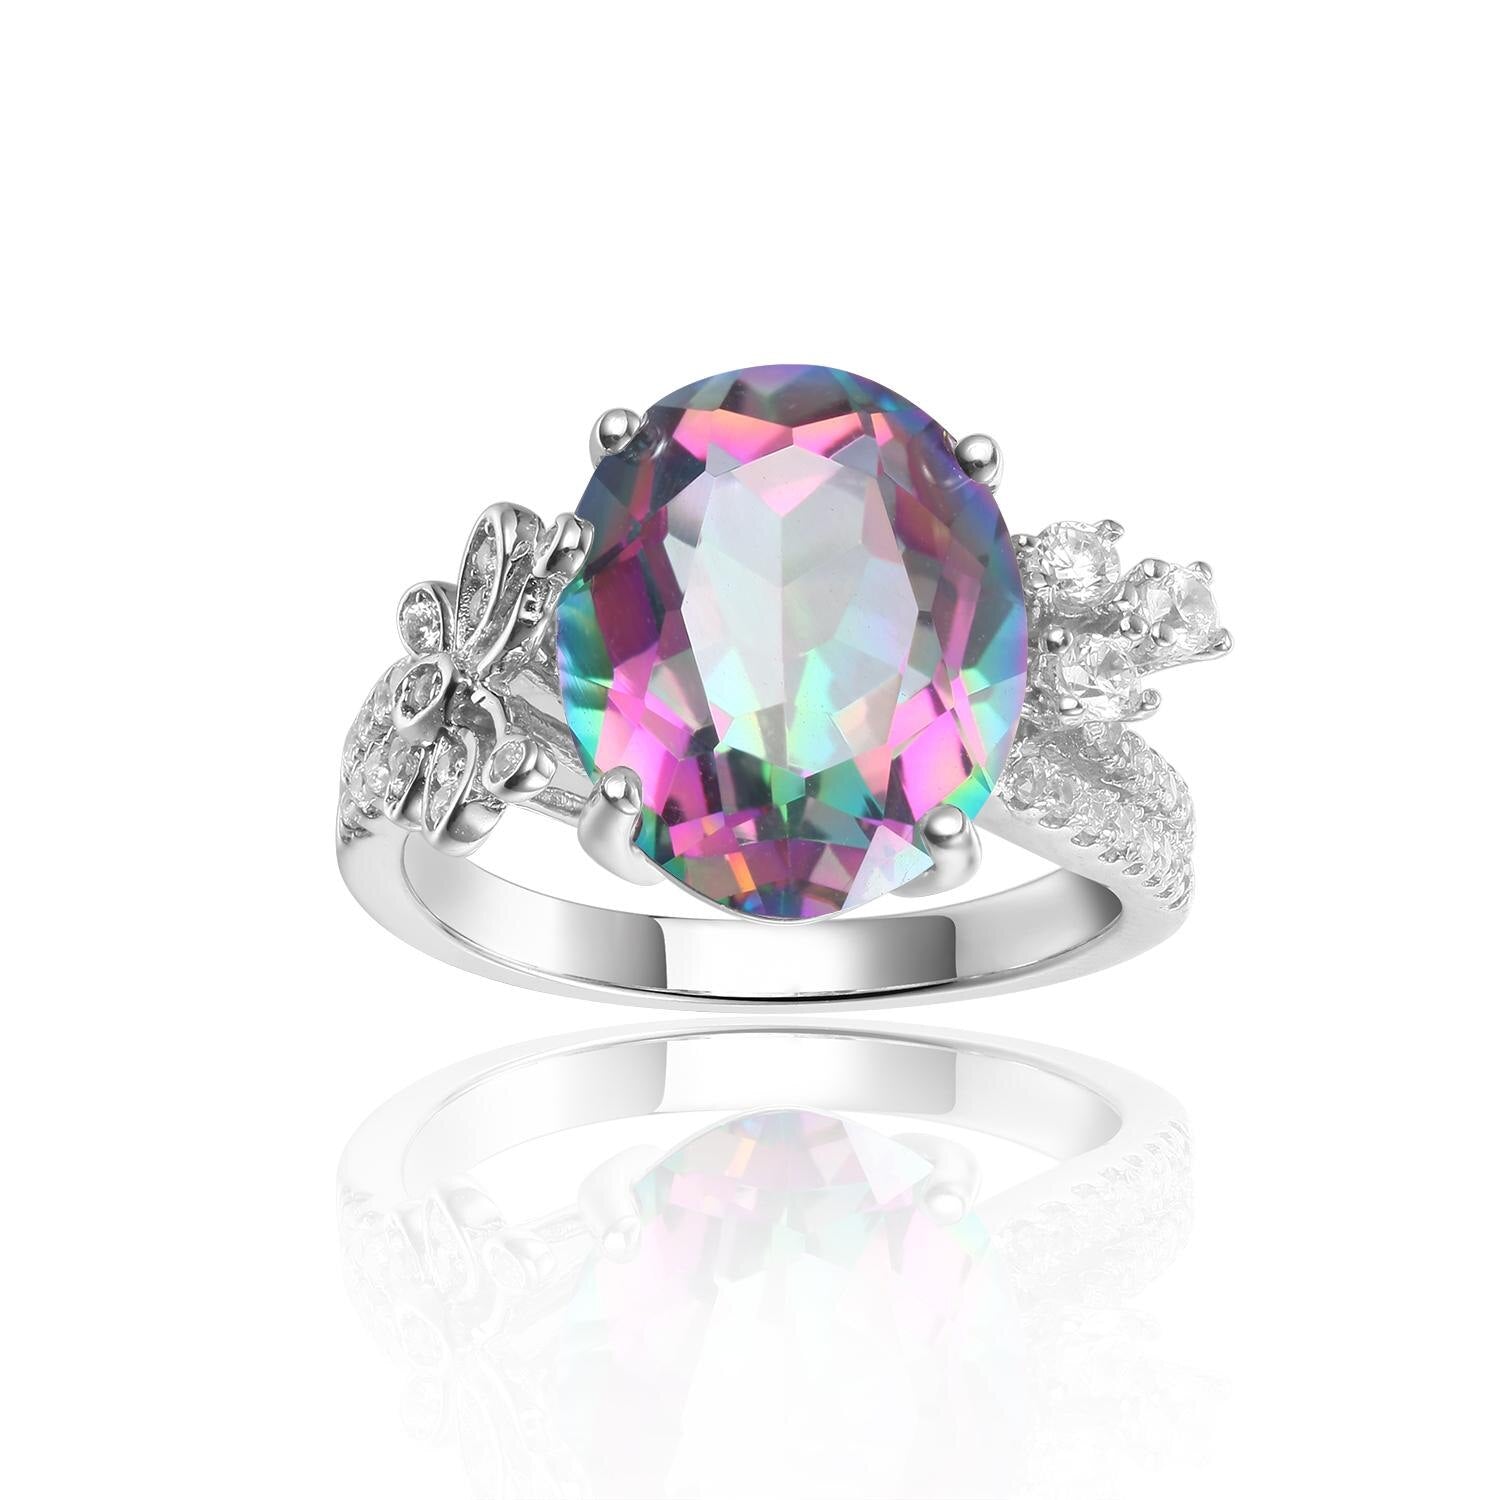 GEM&#39;S BALLET 4.36Ct 10x12mm Oval Rainbow Mystic Topaz Gemstone Promise Engagement Rings in Sterling Silver Gift For Her Rainbow|925 Sterling Silver